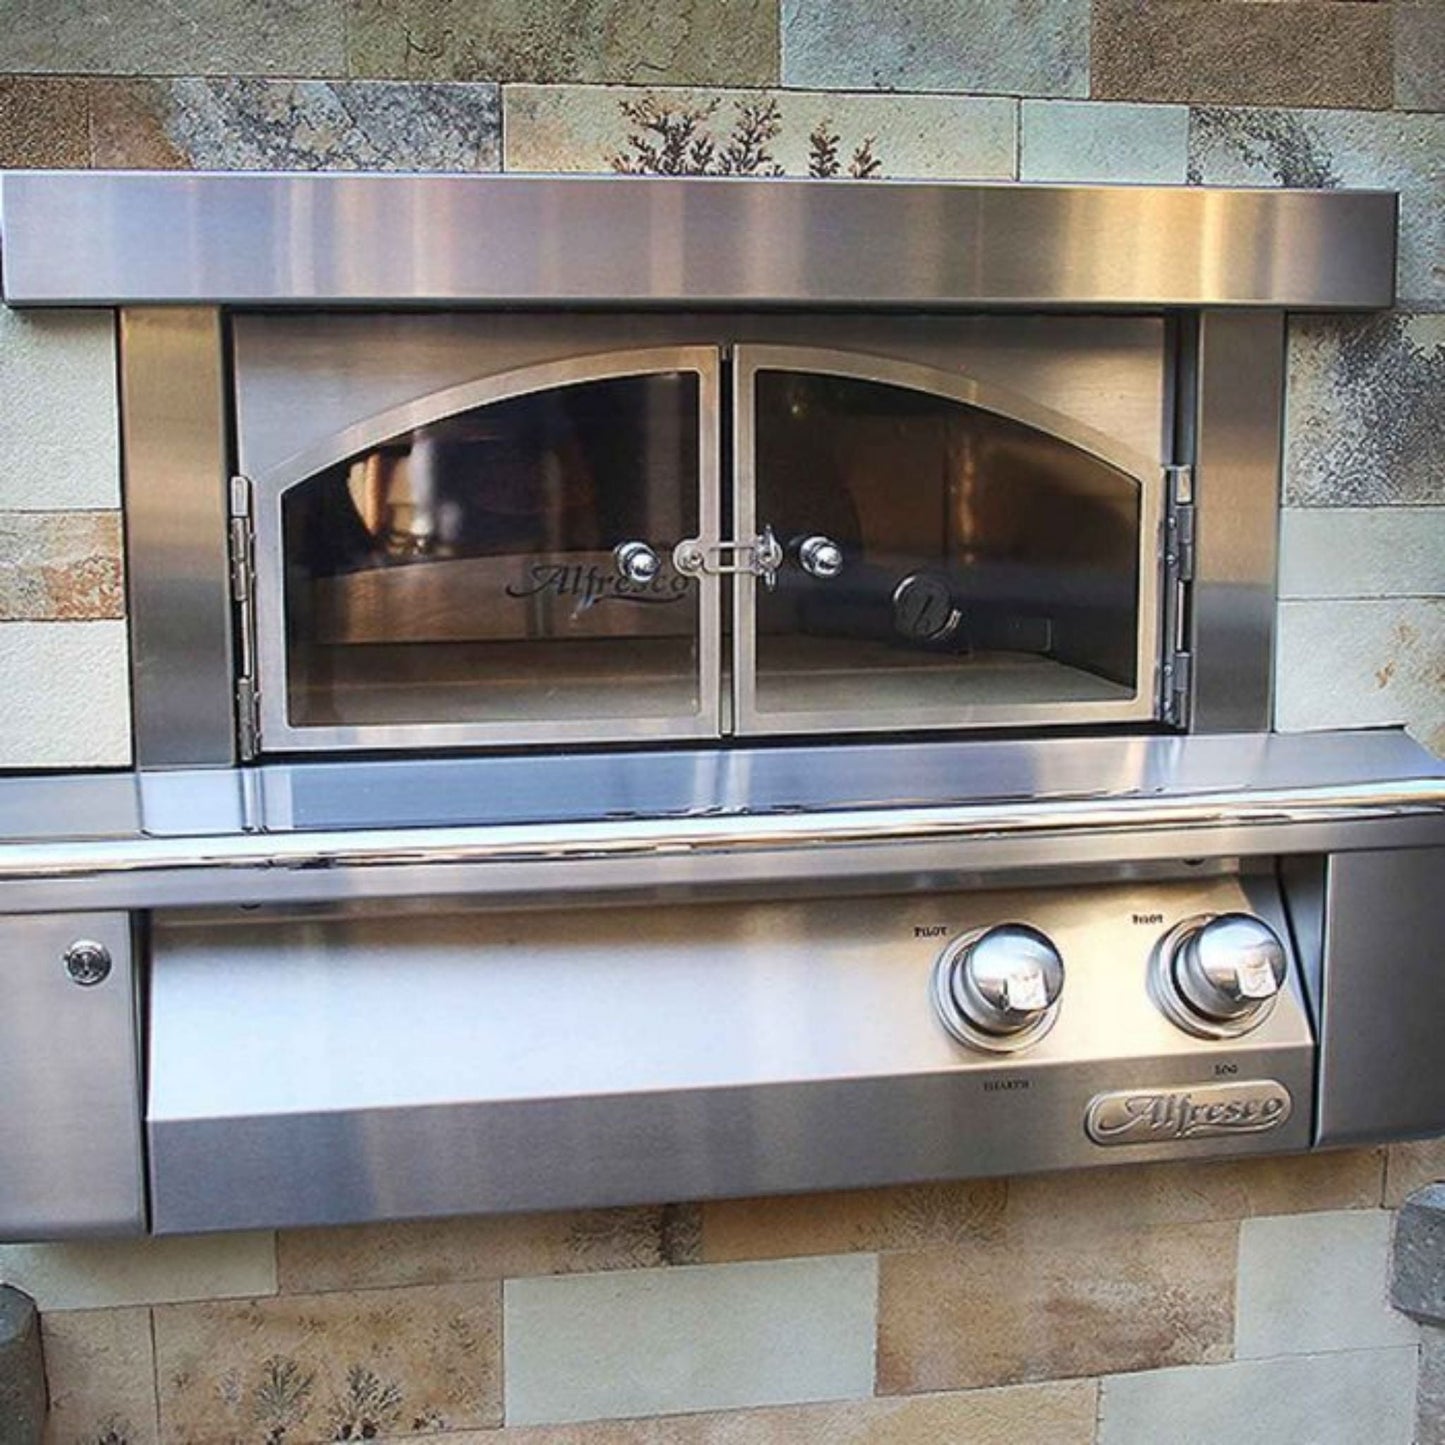 Alfresco 30" Stainless Steel Liquid Propane Pizza Oven for Built-in Installations